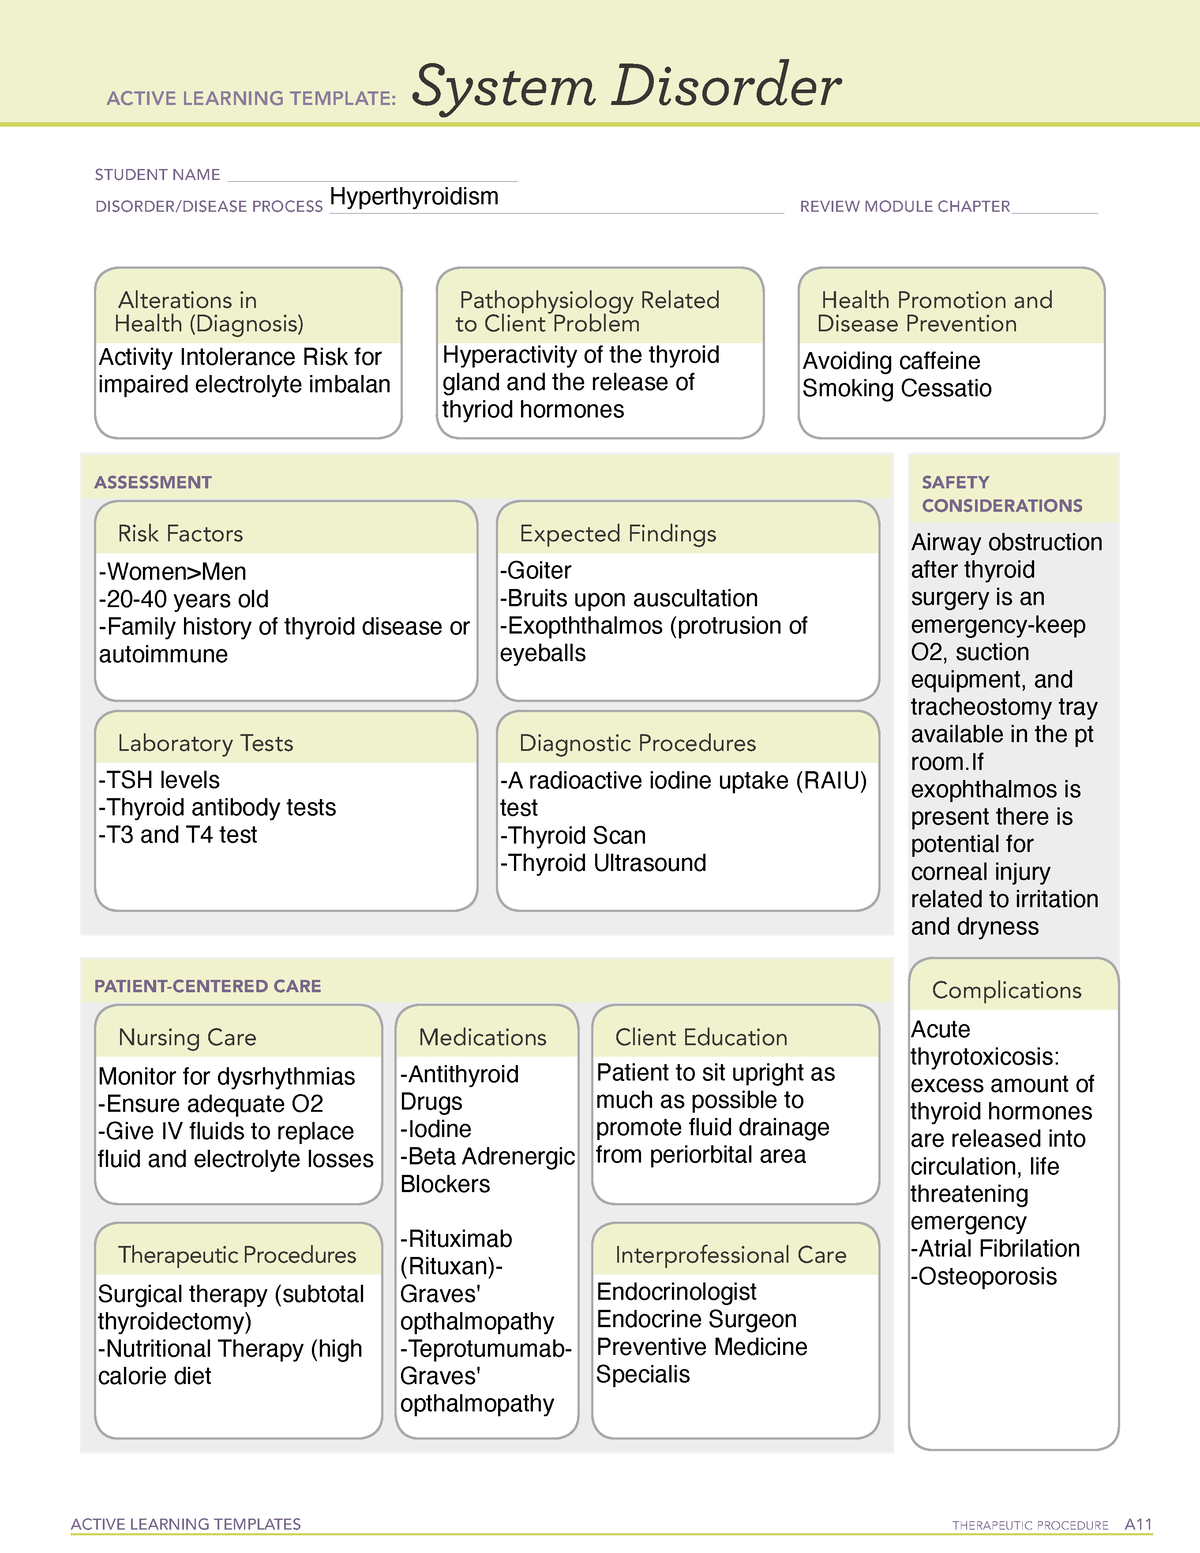 Hyperthyroidism AV practice ACTIVE LEARNING TEMPLATES THERAPEUTIC